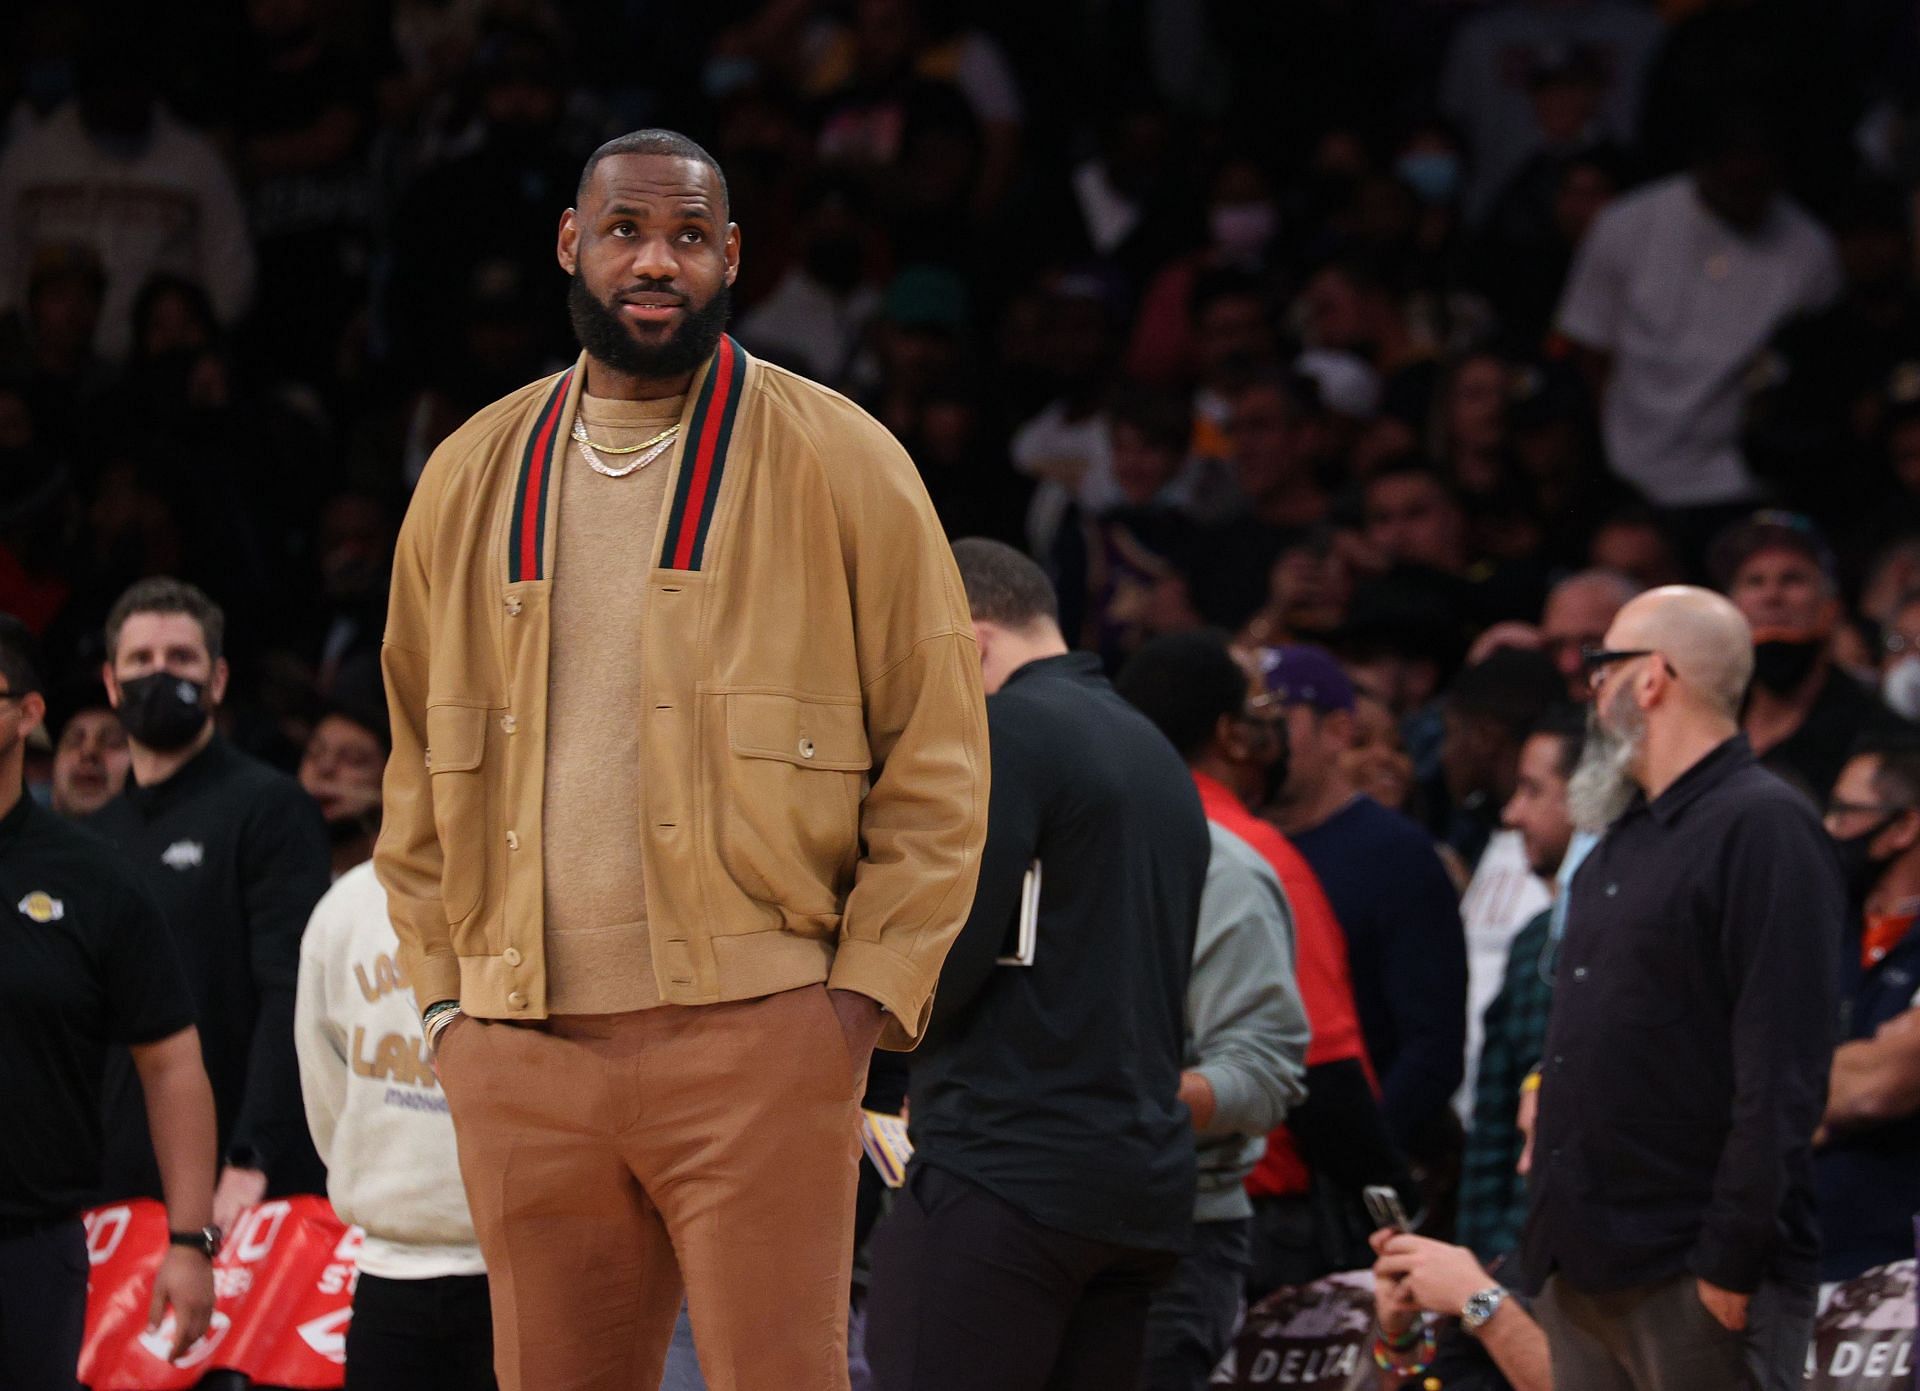 LeBron James has been out of action for the Los Angeles Lakers in the past few games